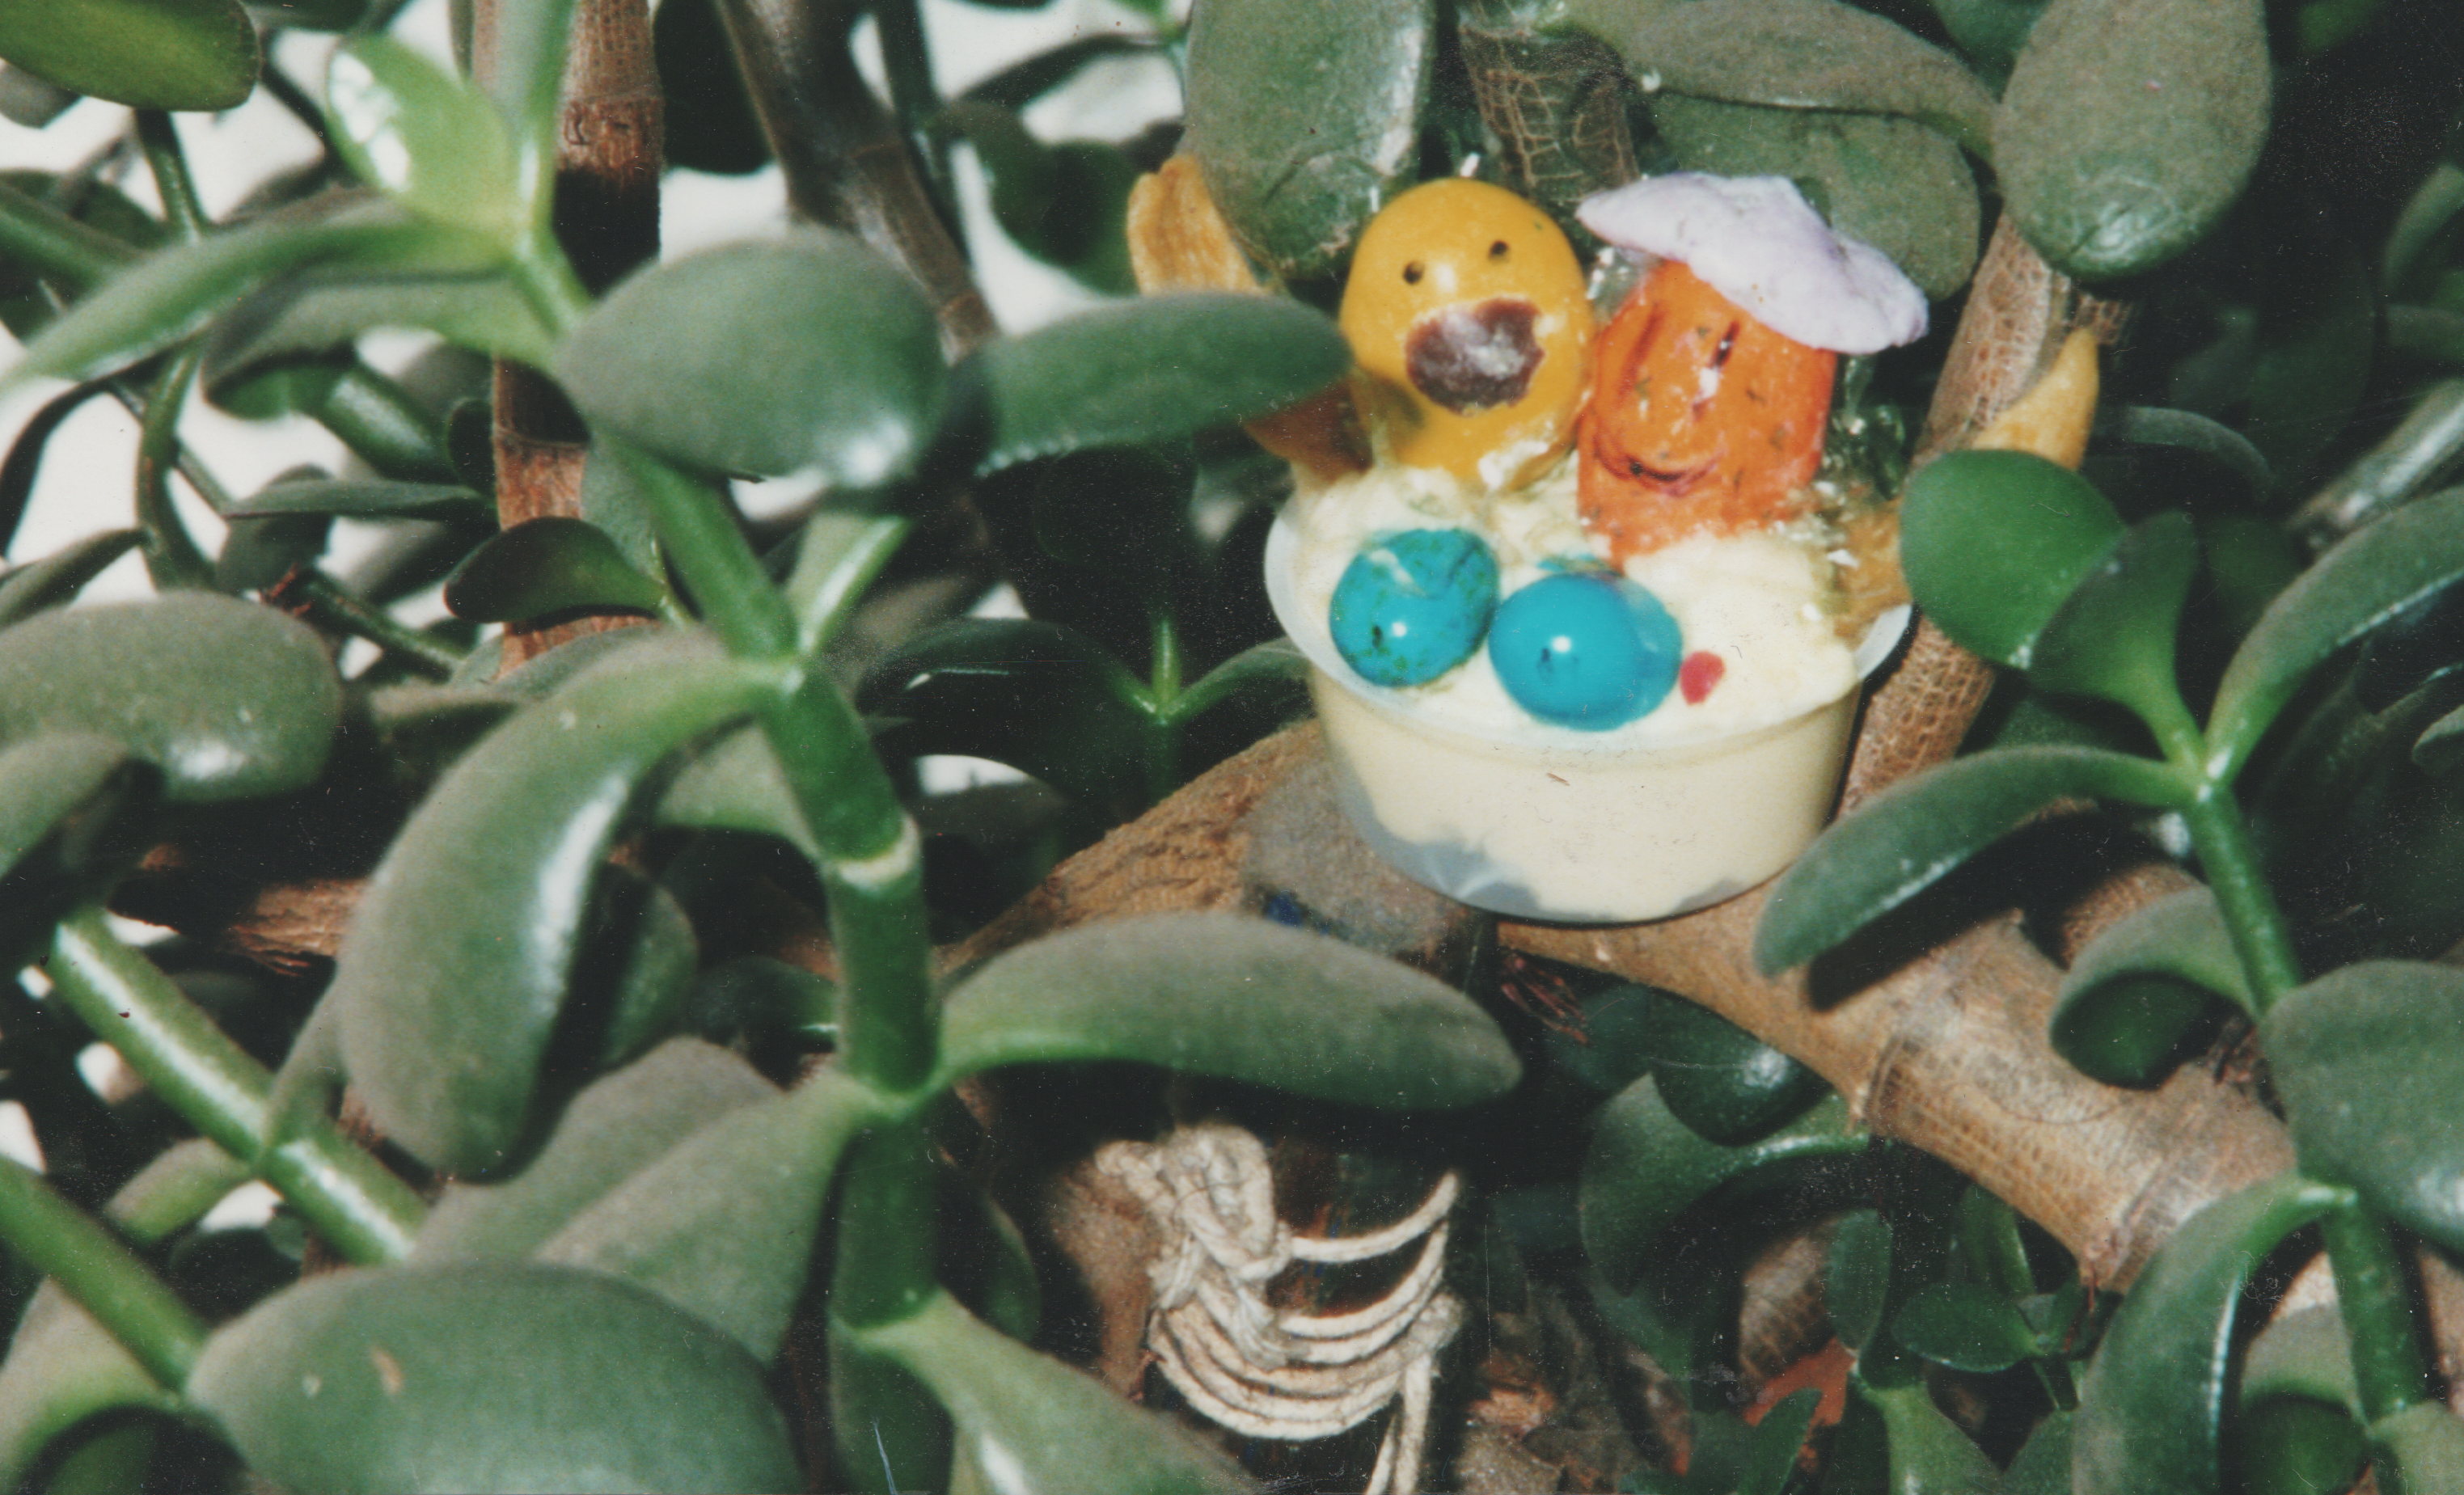 1999 maybe apx - Easter - Katie Arnold Constructed This, Mary's Kitchen-1.jpg